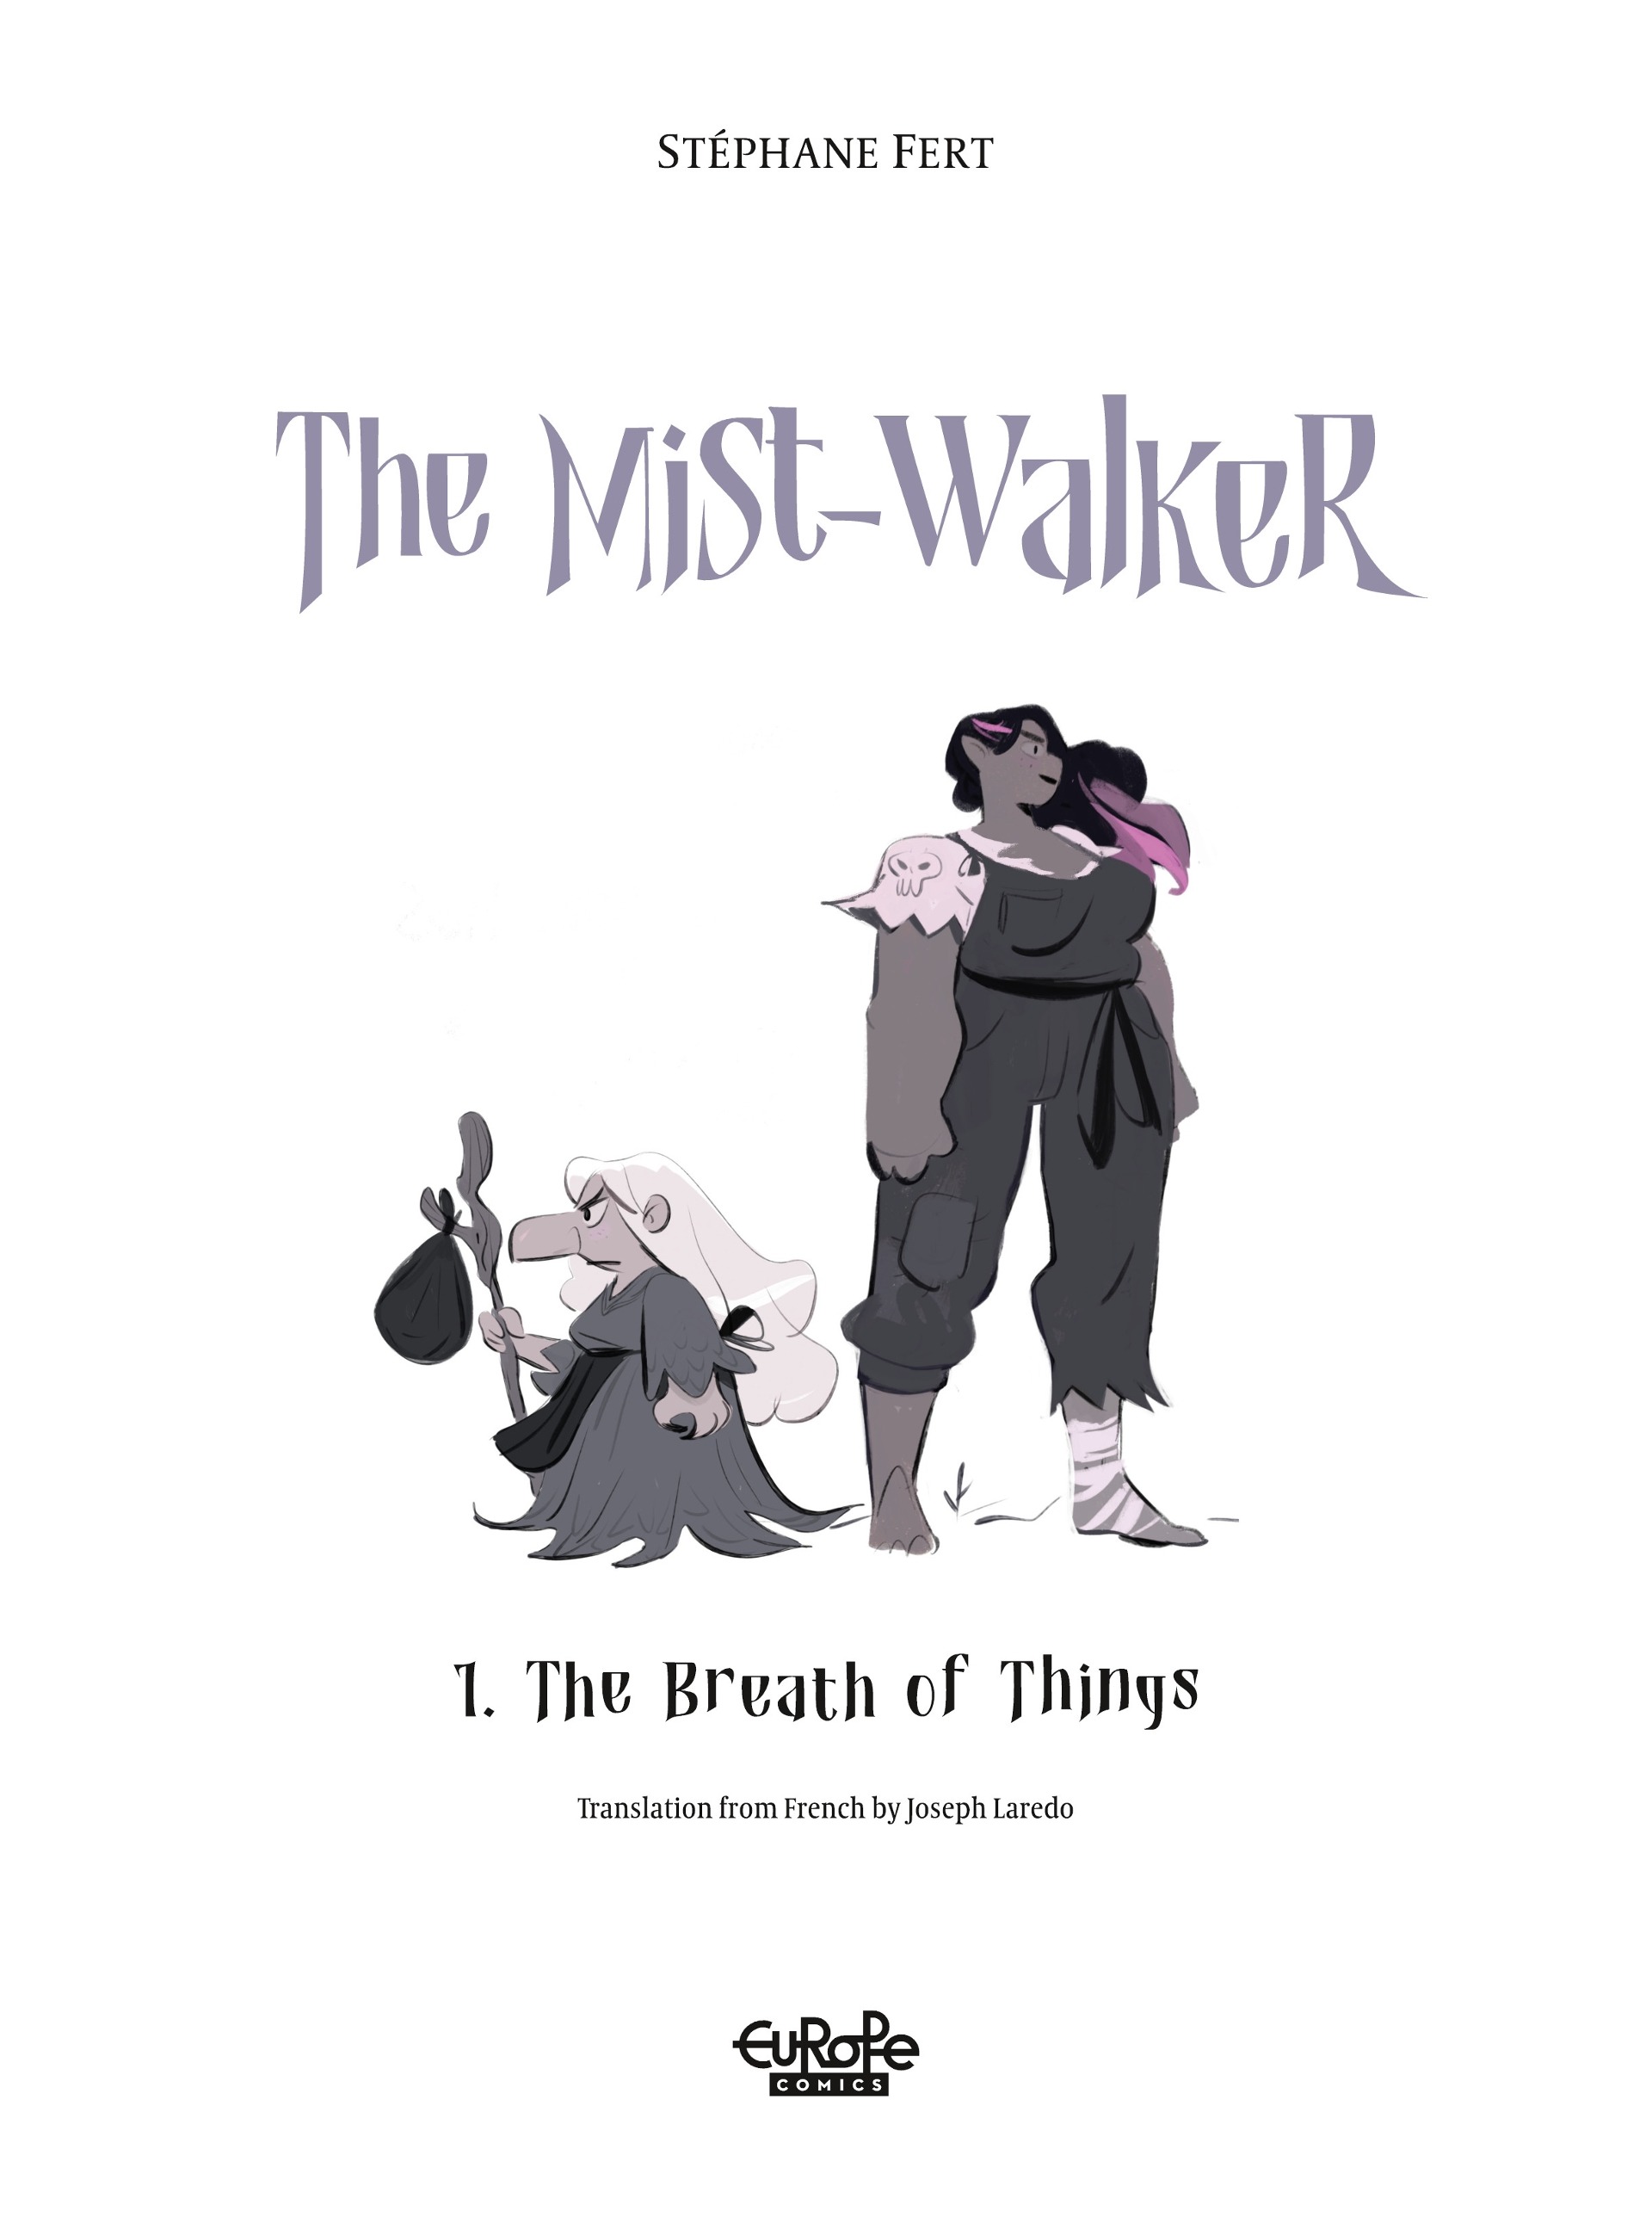 Read online The Mist-Walker: The Breath of Things comic -  Issue # TPB - 2